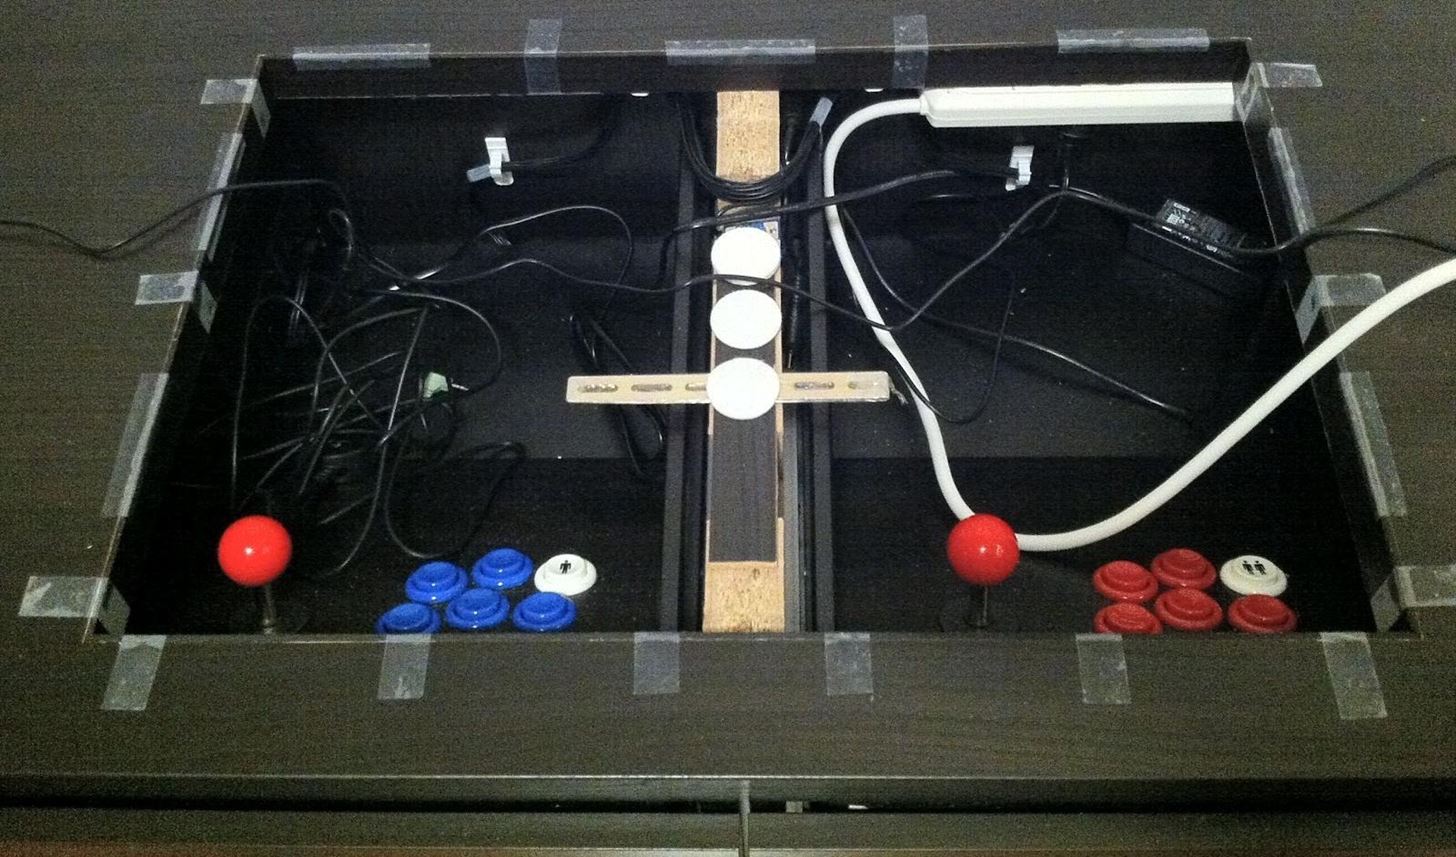 Disguise Your Gaming Addiction with This DIY Coffee Table Arcade Machine